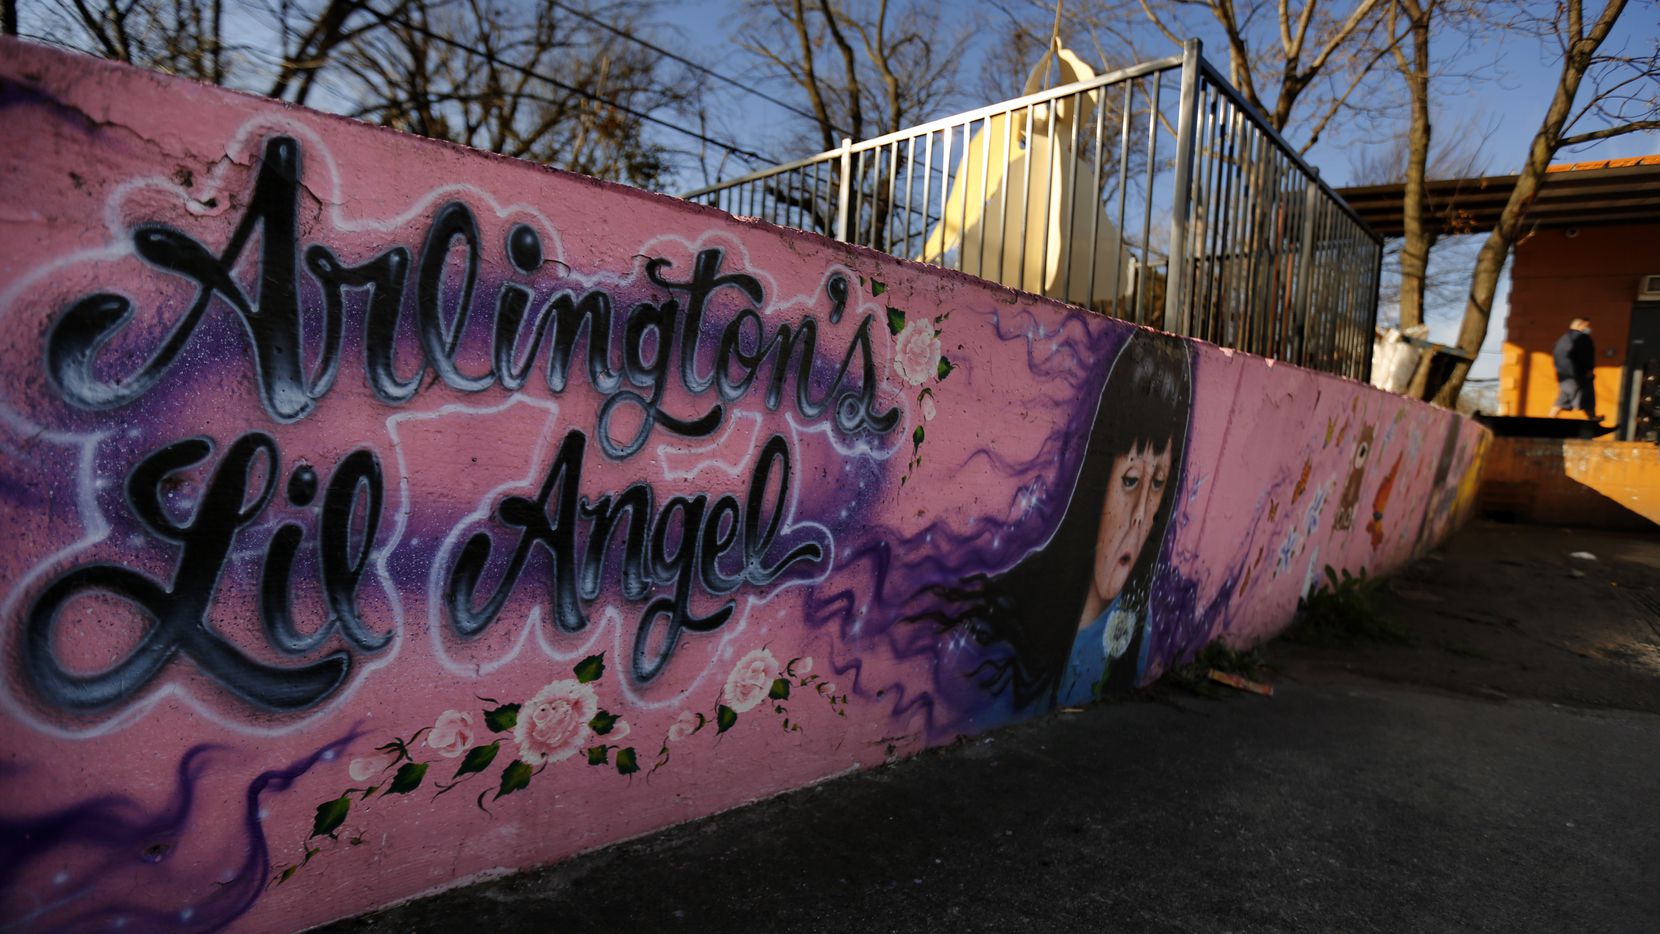 A large painted mural adorns a memorial for Amber Hagerman, the little girl who was abducted on her bike and later found dead in Arlington, Texas in 1996.